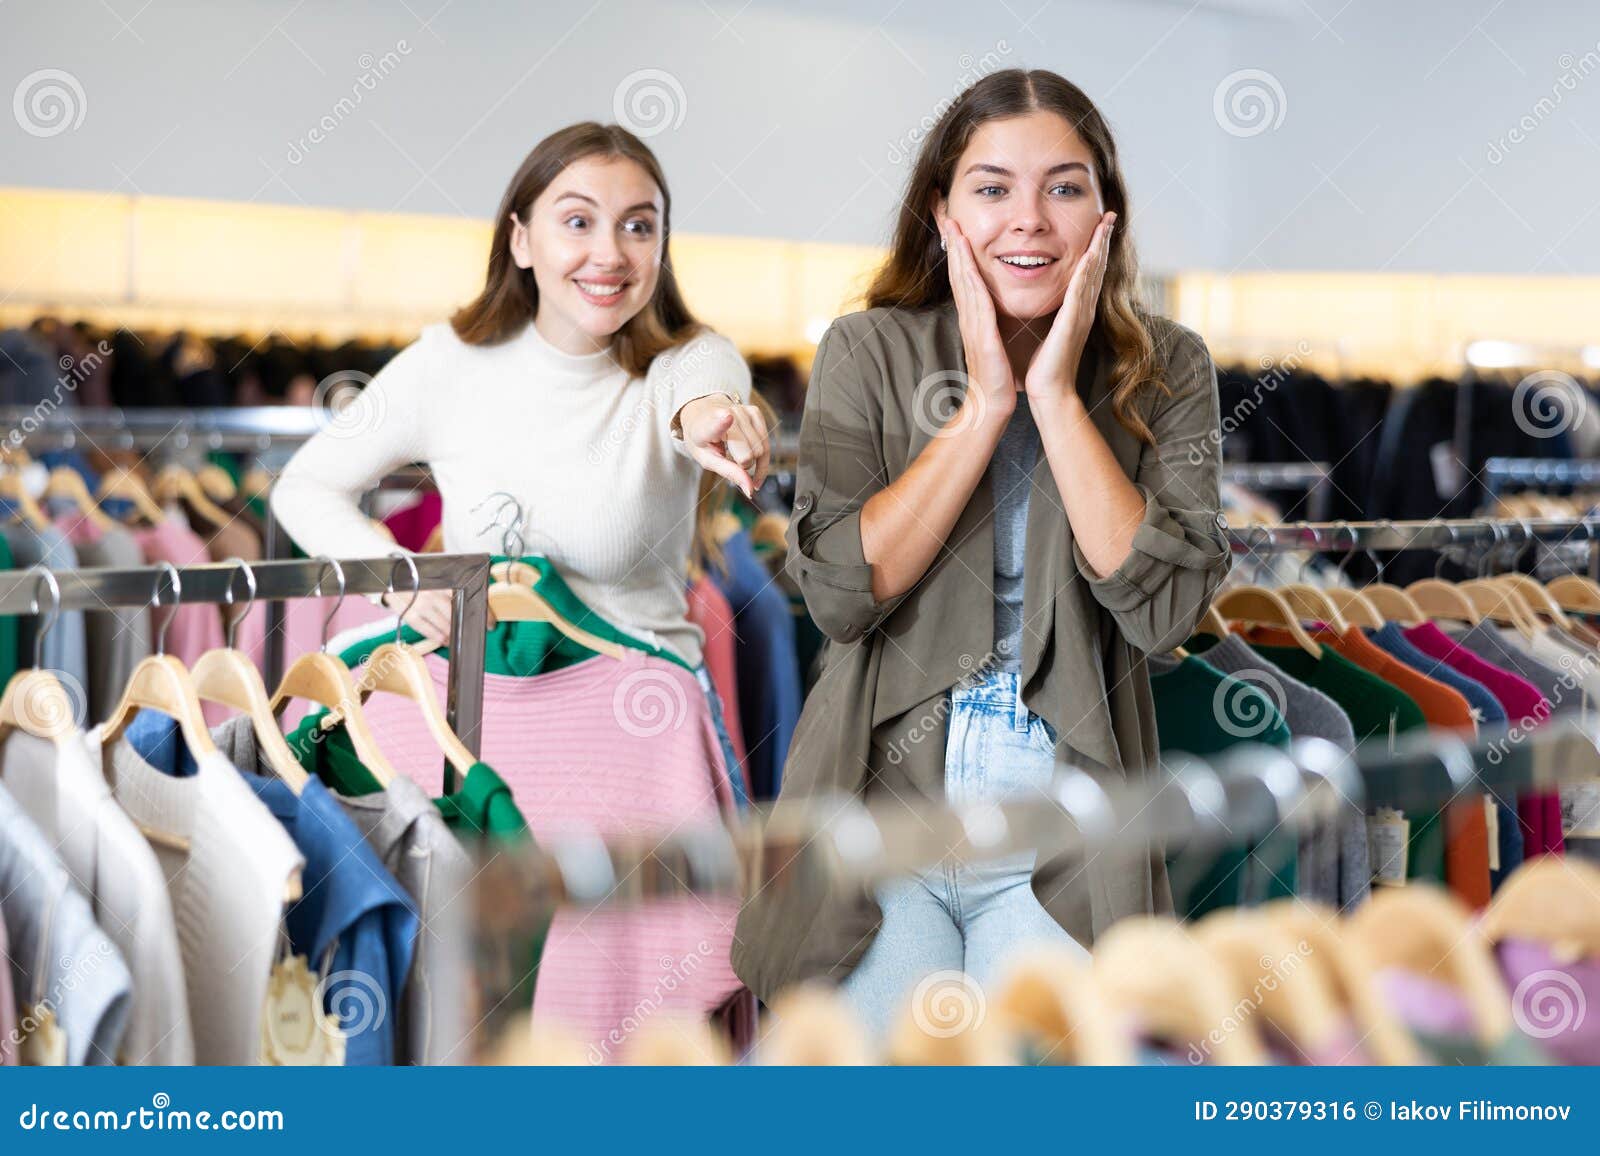 Amazed Female Holding Warm Clothes on Hangers and Showing Her Friend a ...